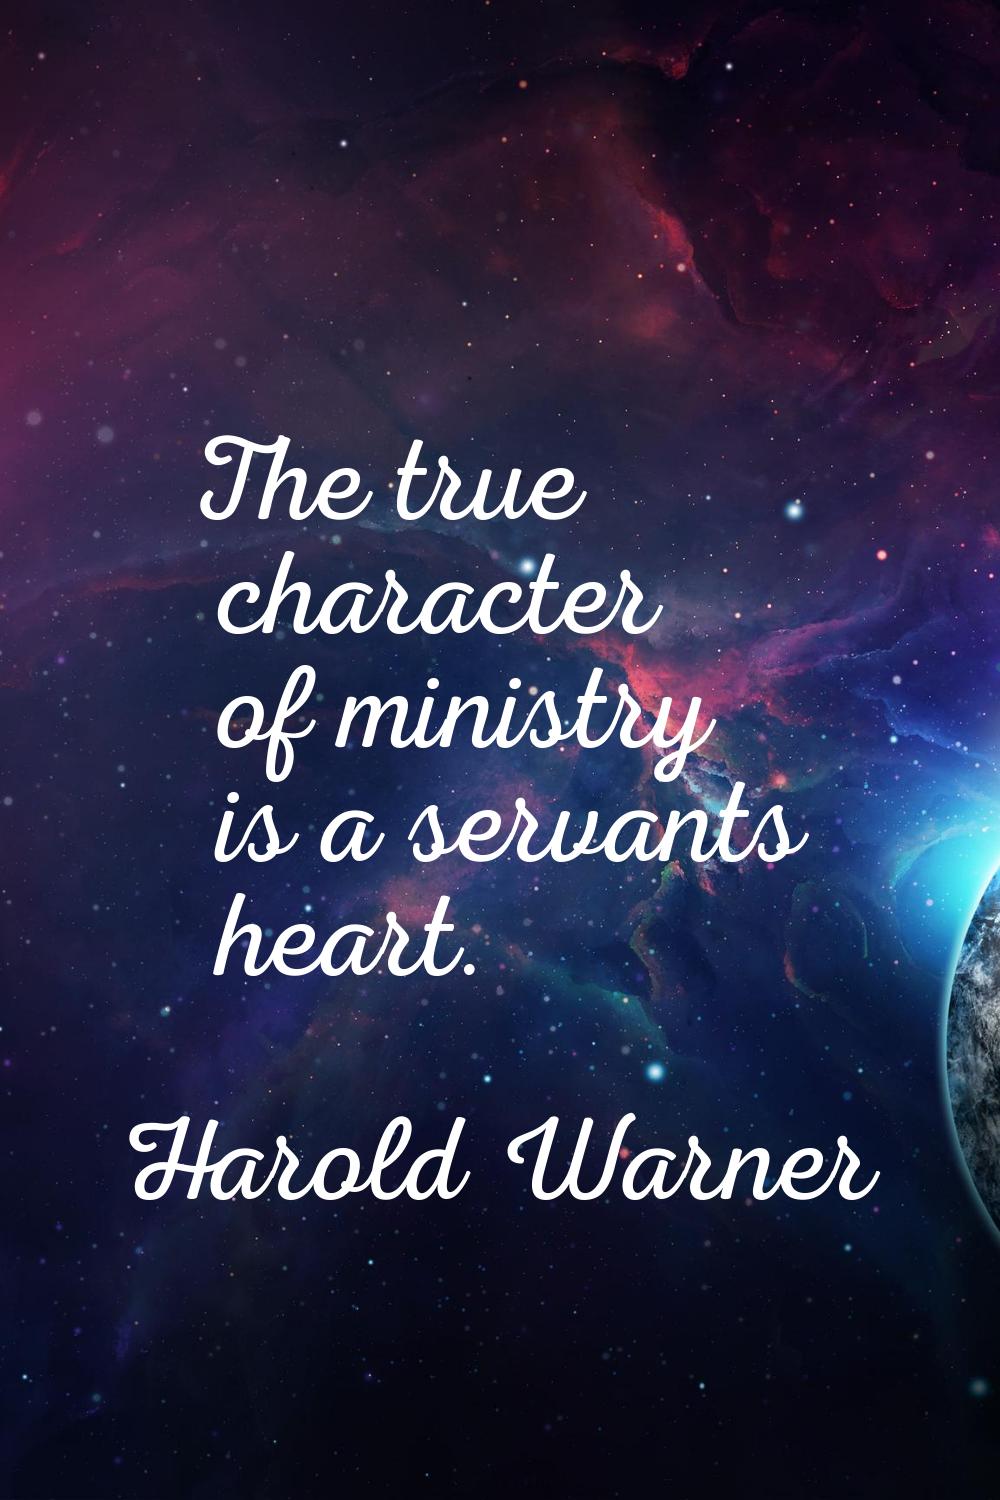 The true character of ministry is a servants heart.